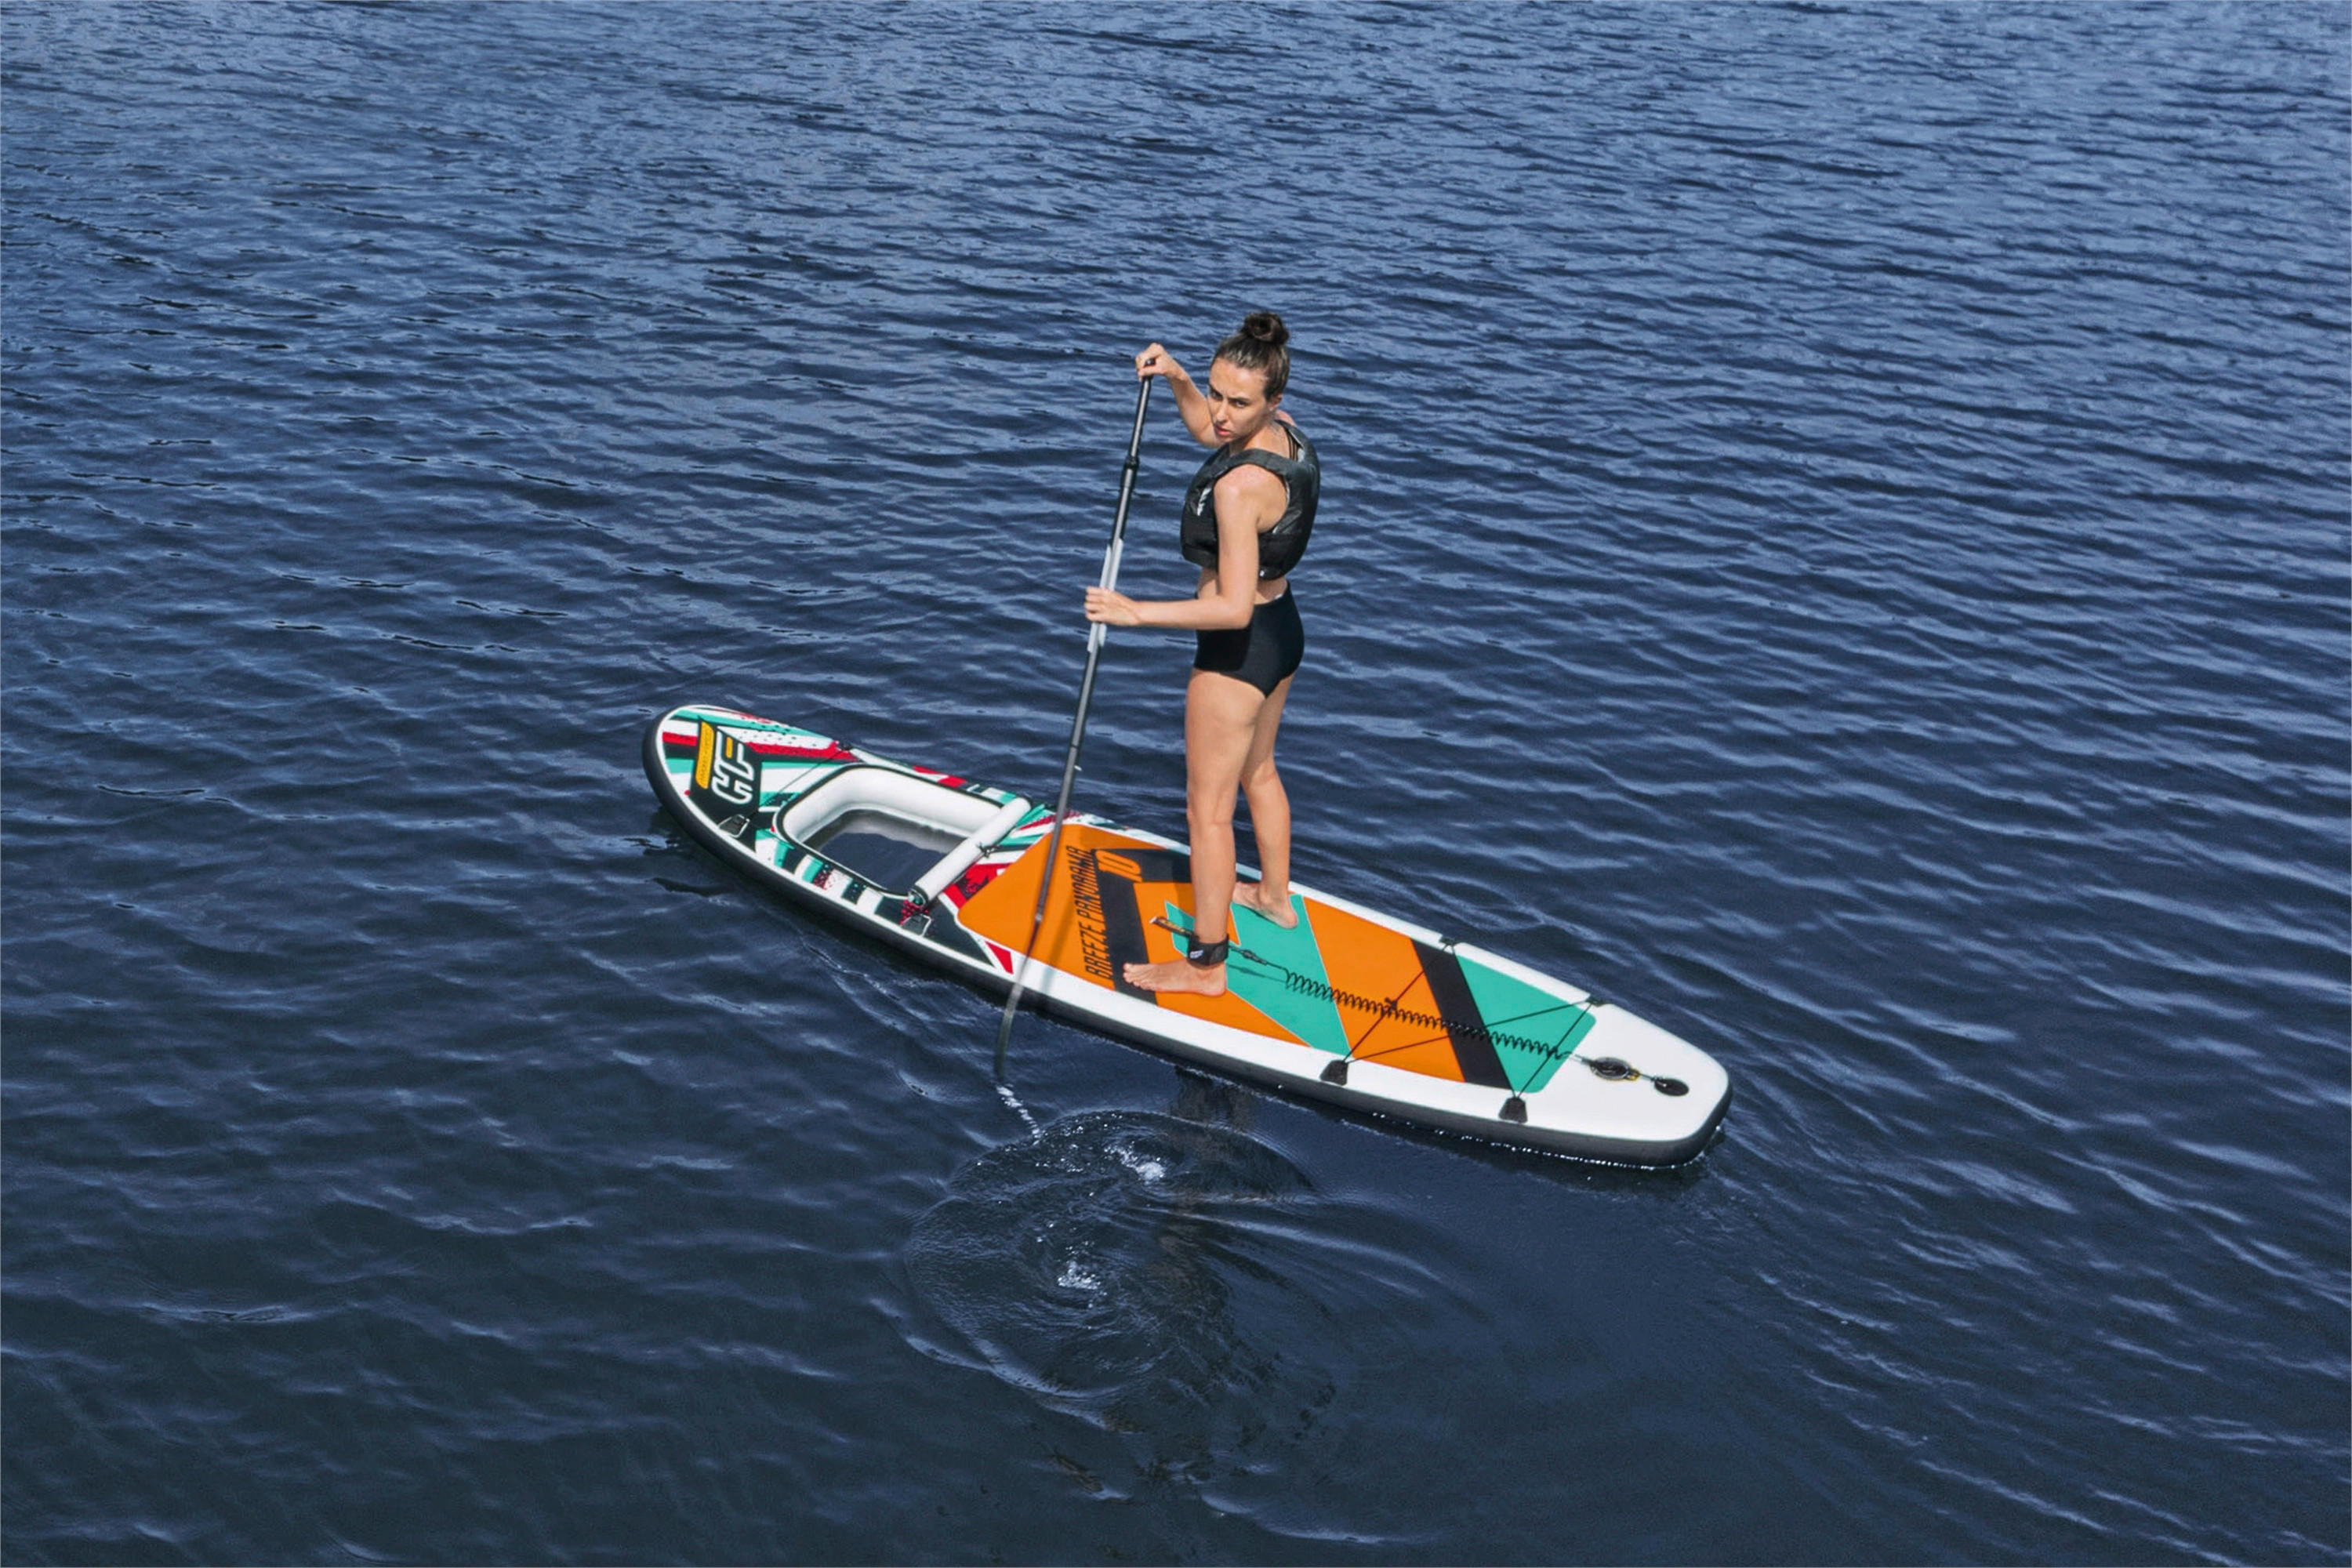 STAND-UP PADDLE BOARD Breeze Panorama 65377  - Multicolor/Weiß, KONVENTIONELL, Kunststoff/Metall (305/84/15cm) - Bestway